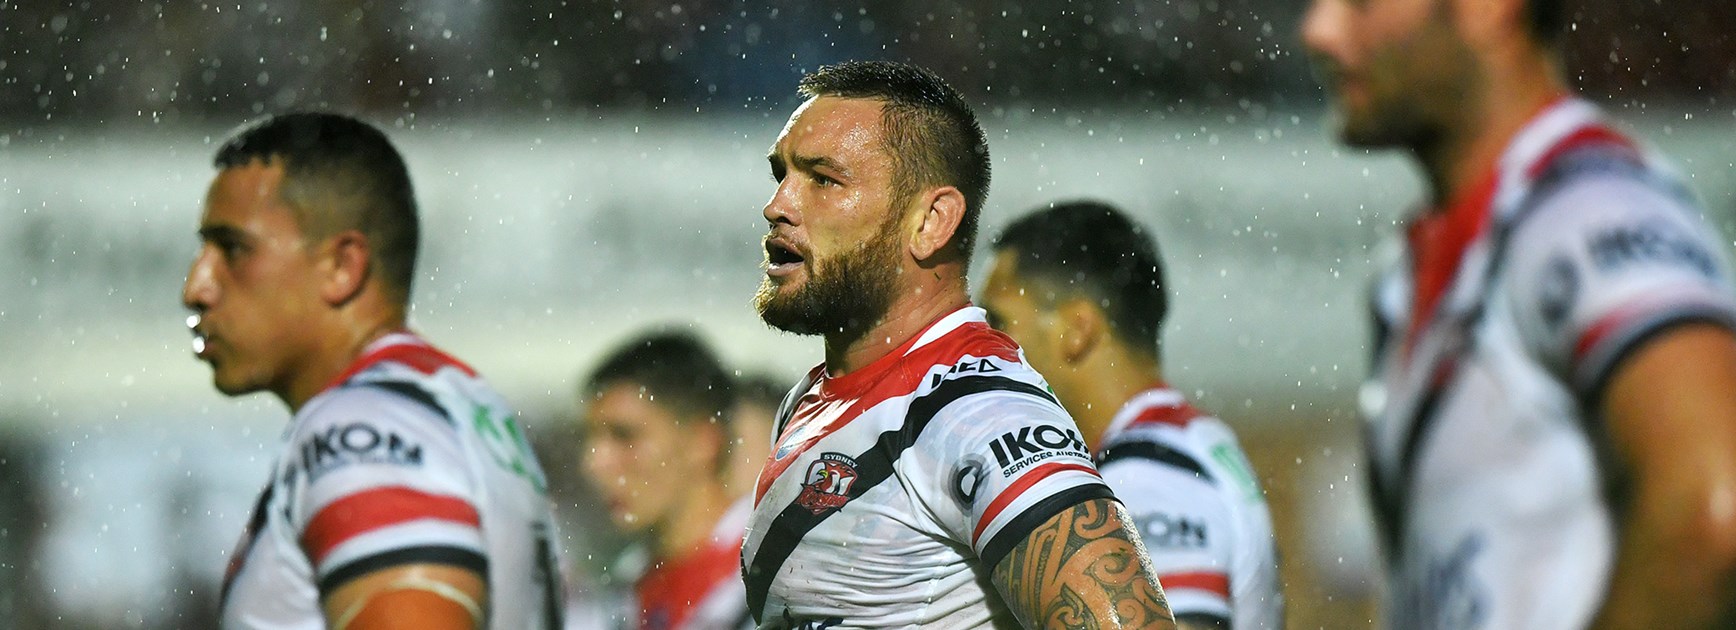 Stat Attack: JWH gets a second wind under his wings